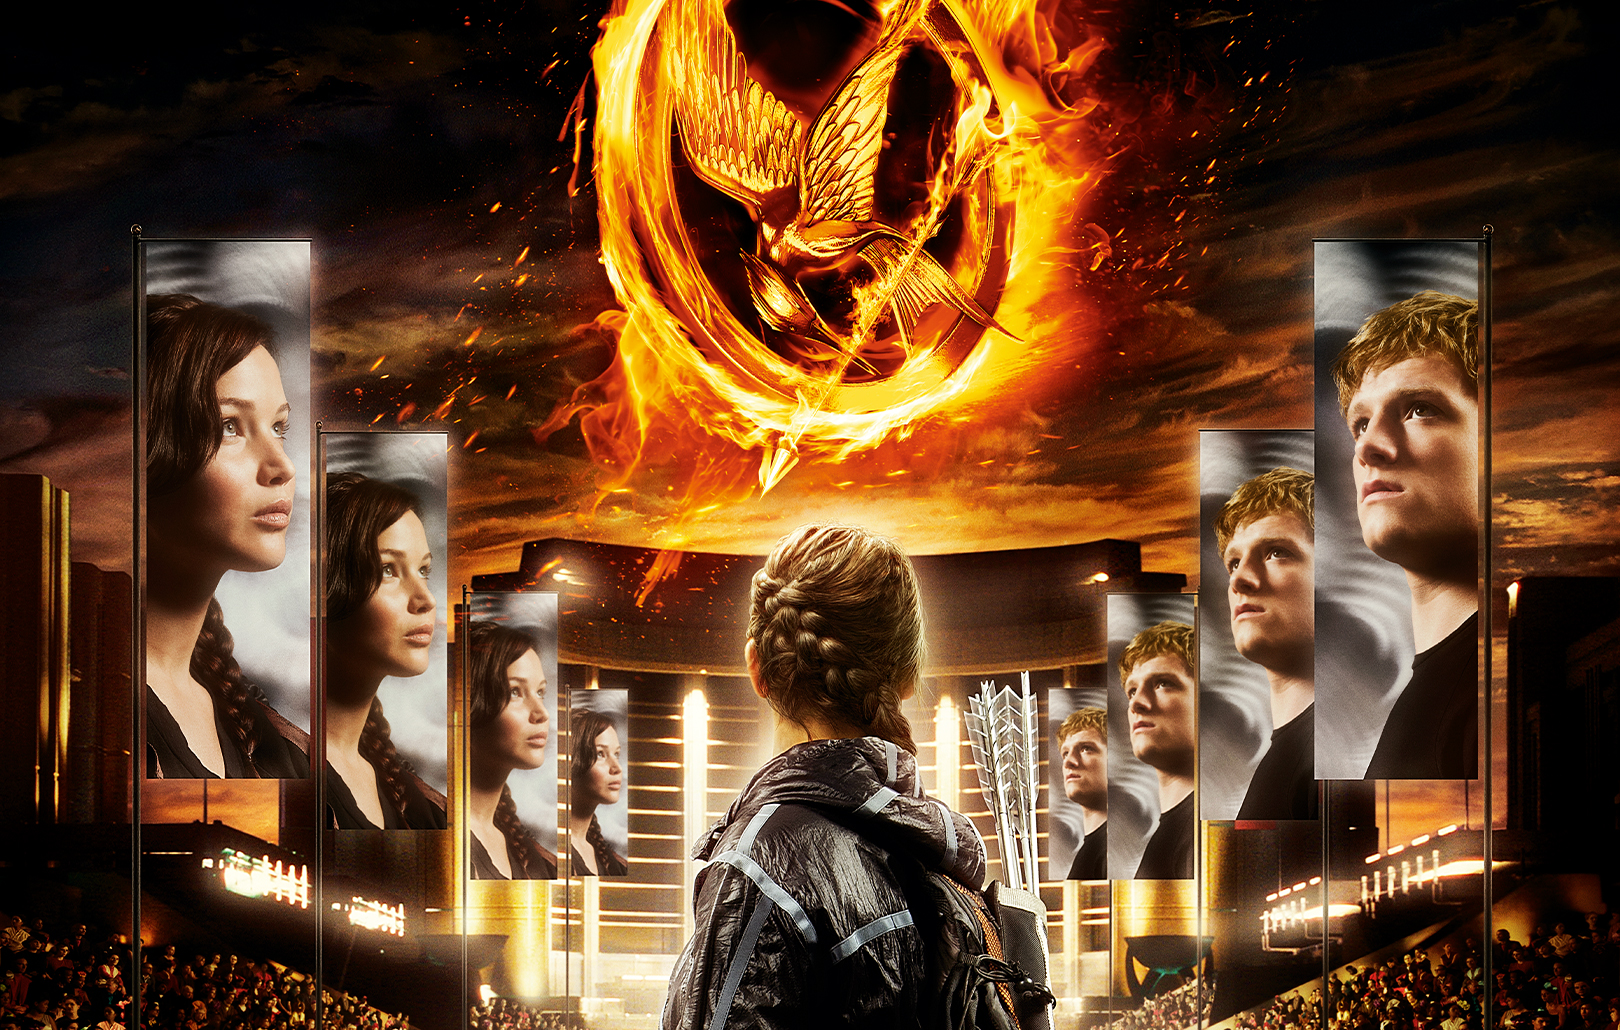 The Hunger Games: 120 New Integration Challenges